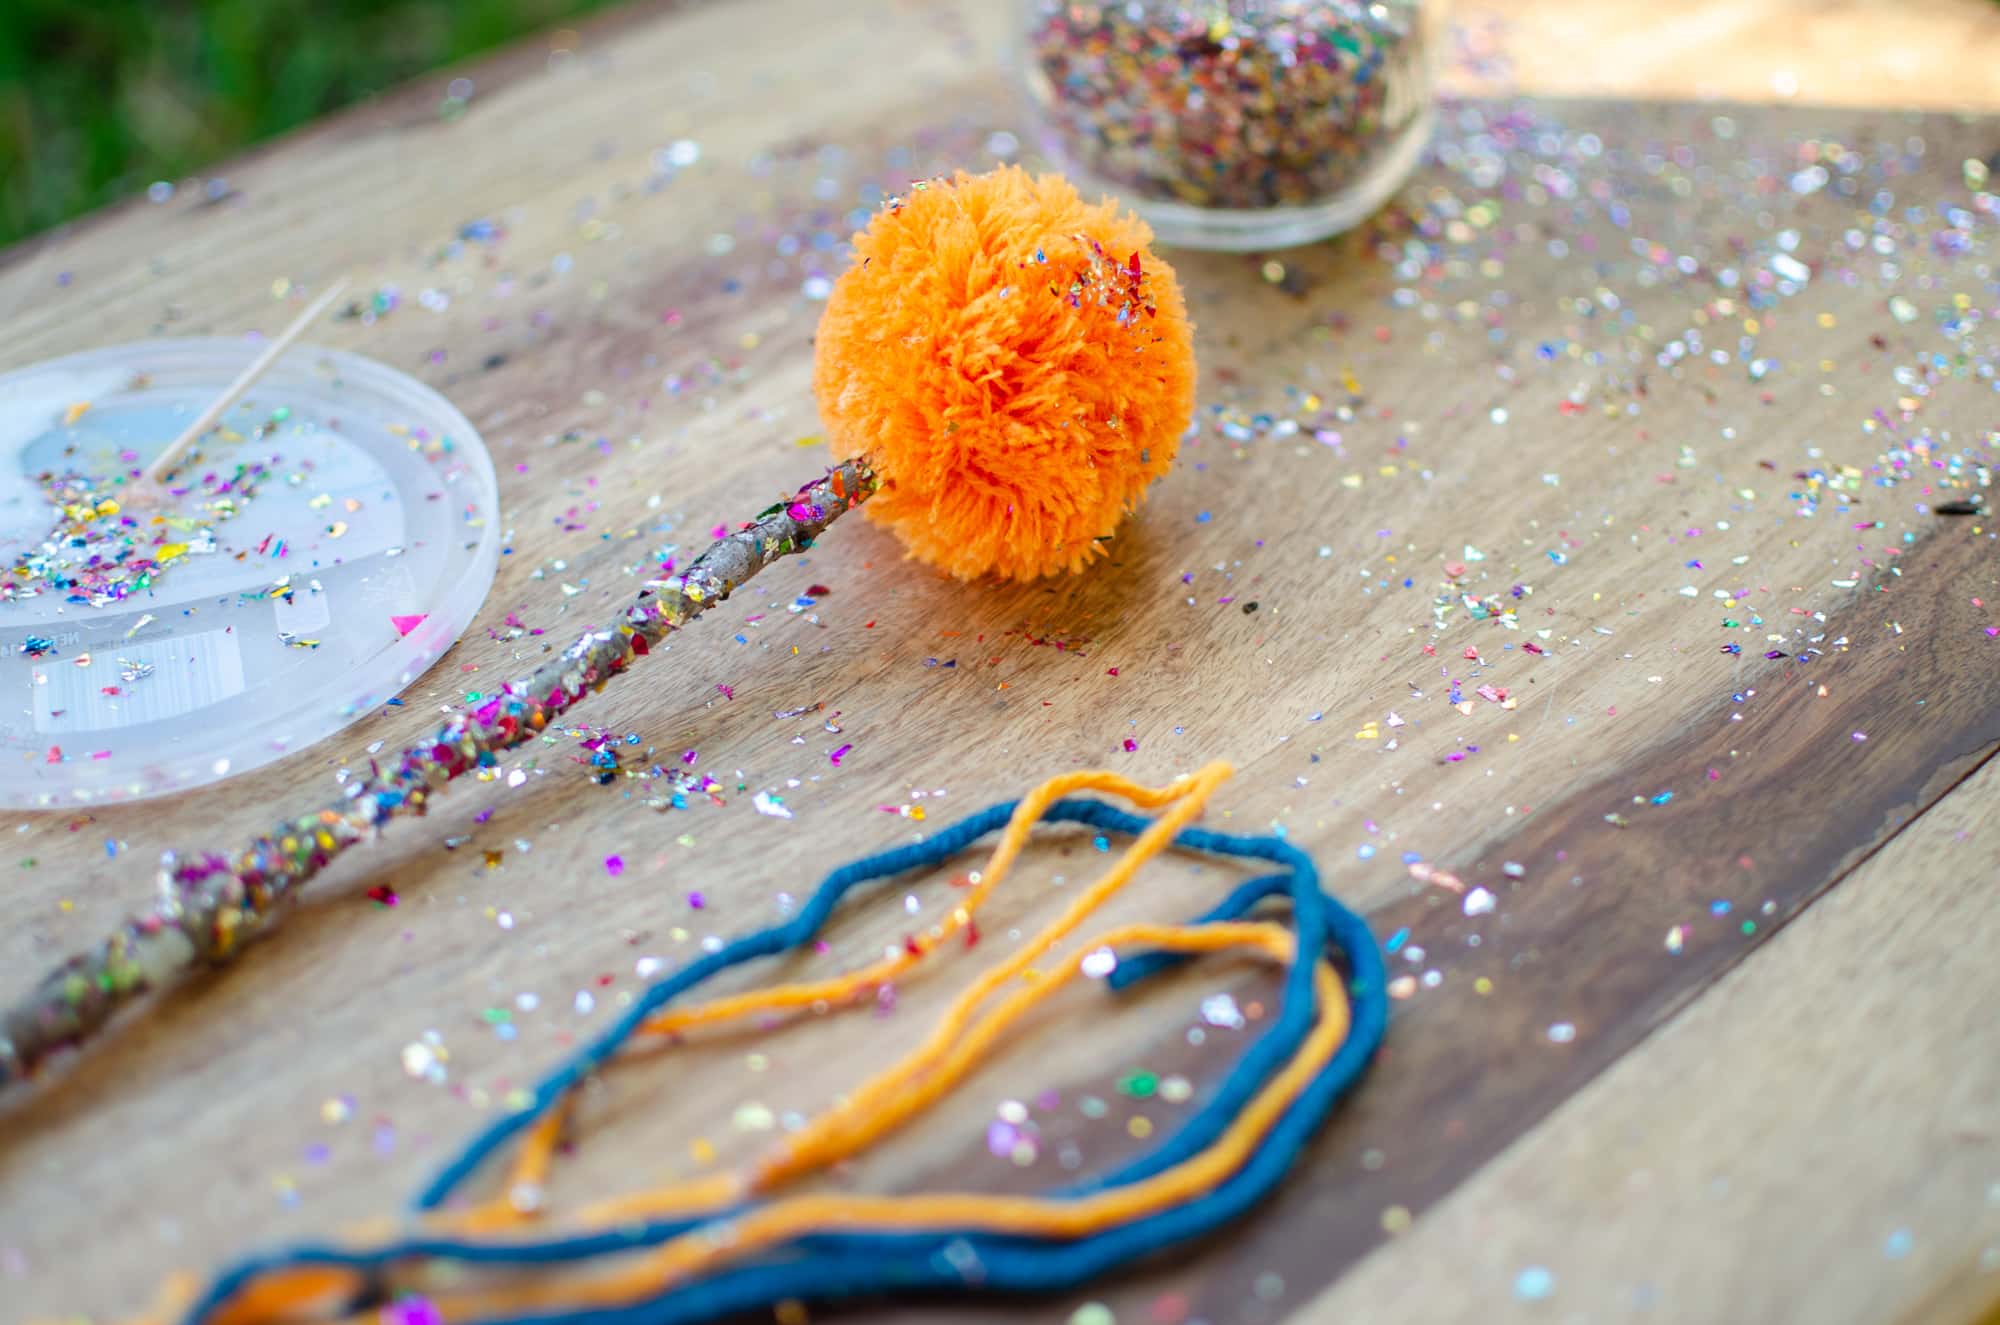 Colorful handmade stick with a bright orange pom pom on the top of a wooden table covered in colorful confetti.